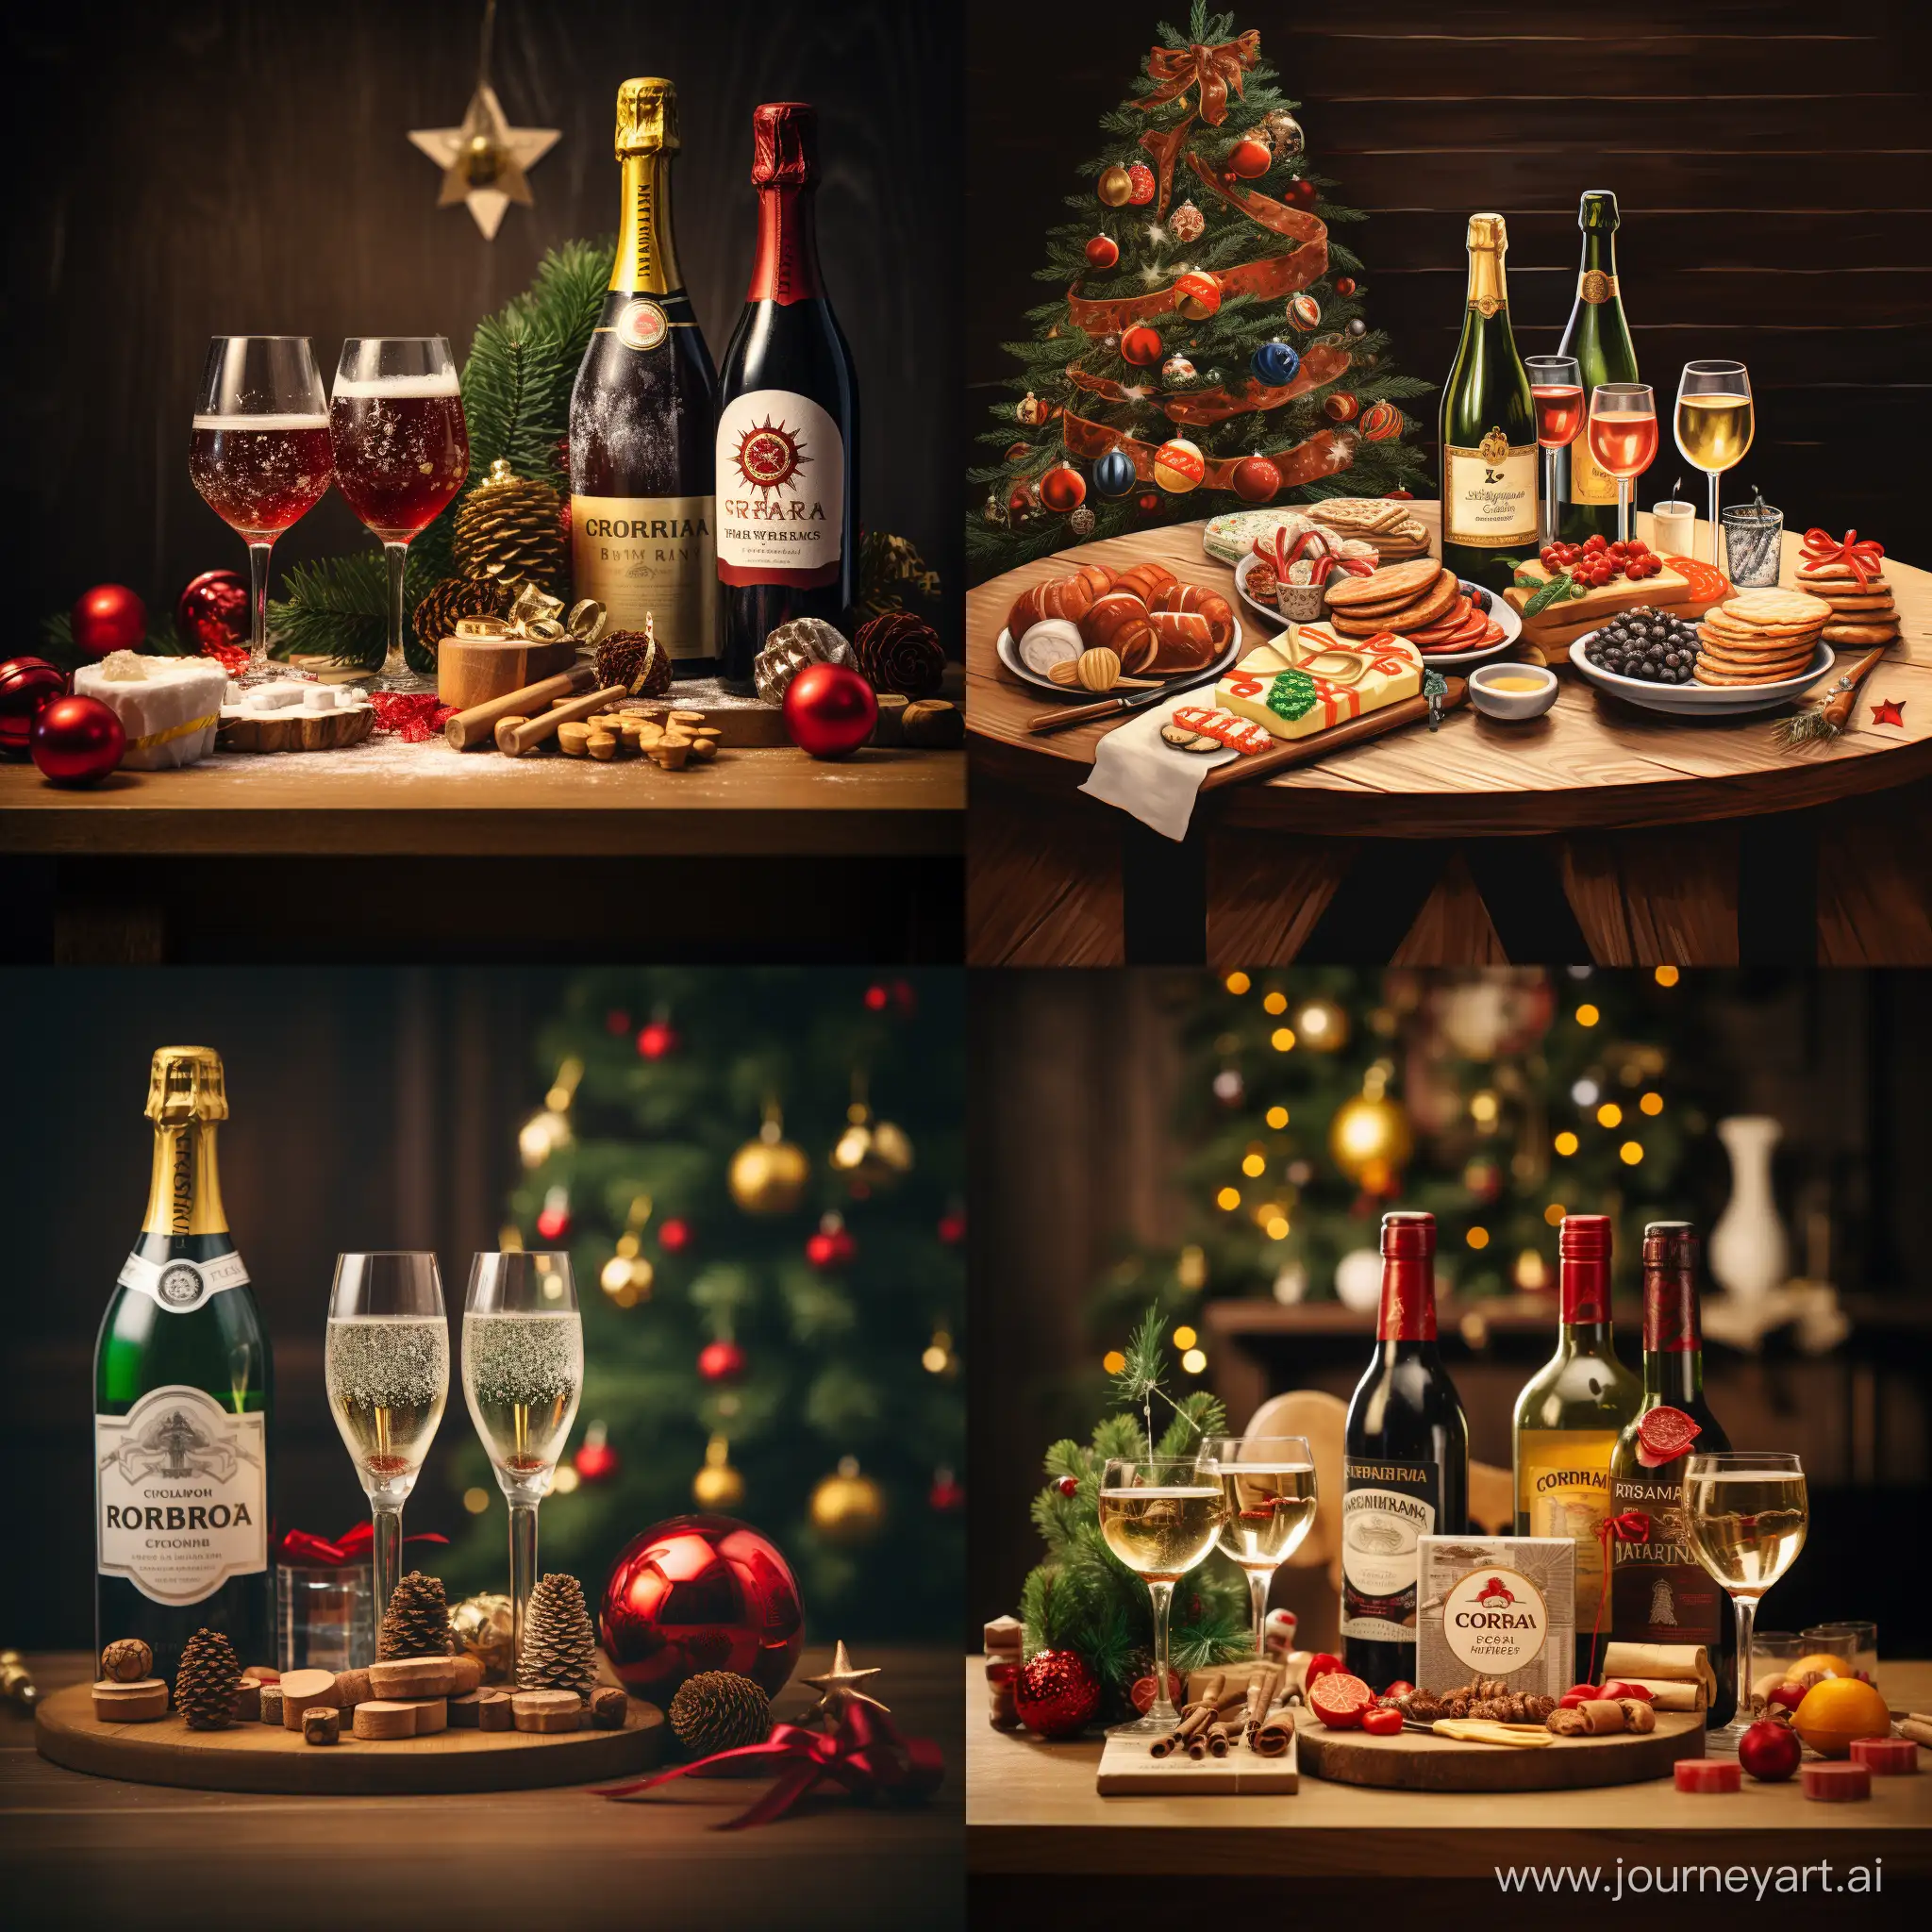 create christmas greeting card for Rotary club Ljubljana Carniola, please include christmas tree, wooden desk with some Prosciutto and cheese on it, three glases of red wine, two glases of white wine, two glases of champagne, big bottle of champagne, rotary international logo